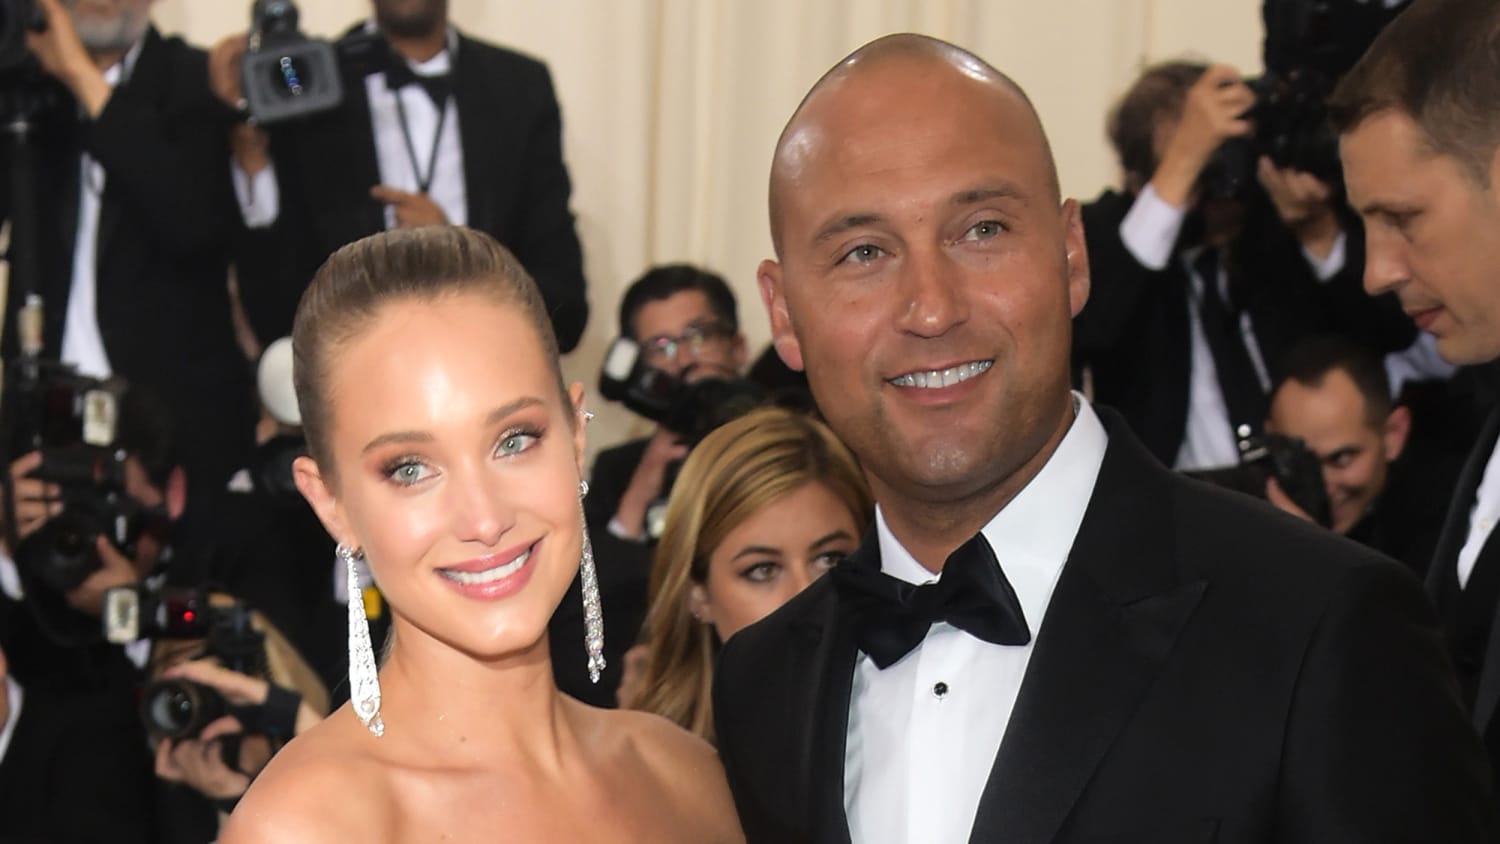 Derek Jeter and wife Hannah are expecting a baby girl - TODAY.com